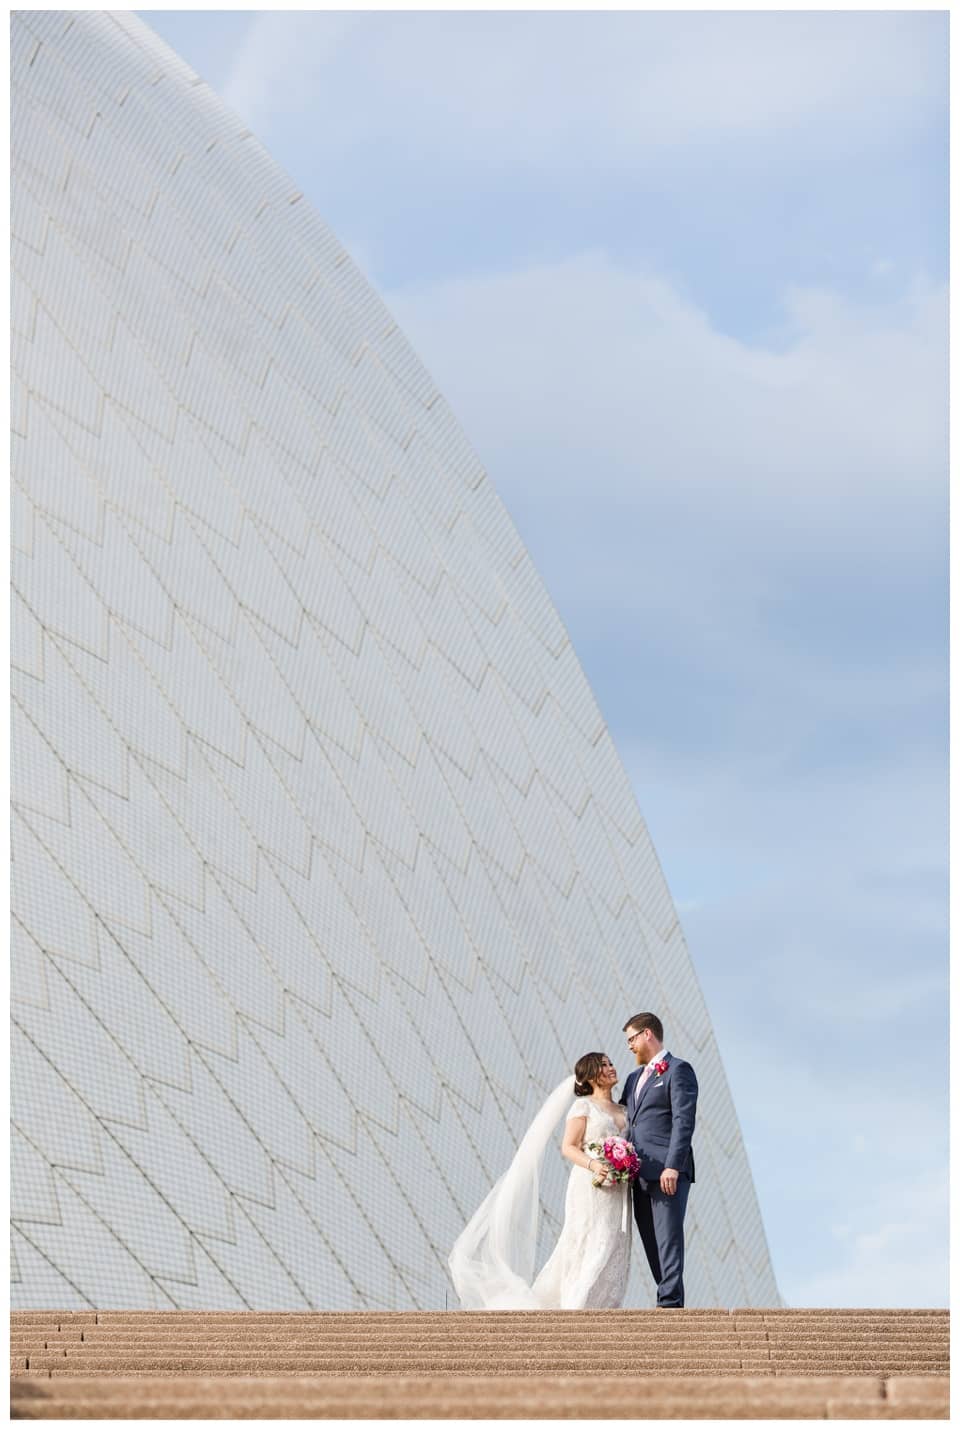 Top Wedding Photography Locations In Sydney